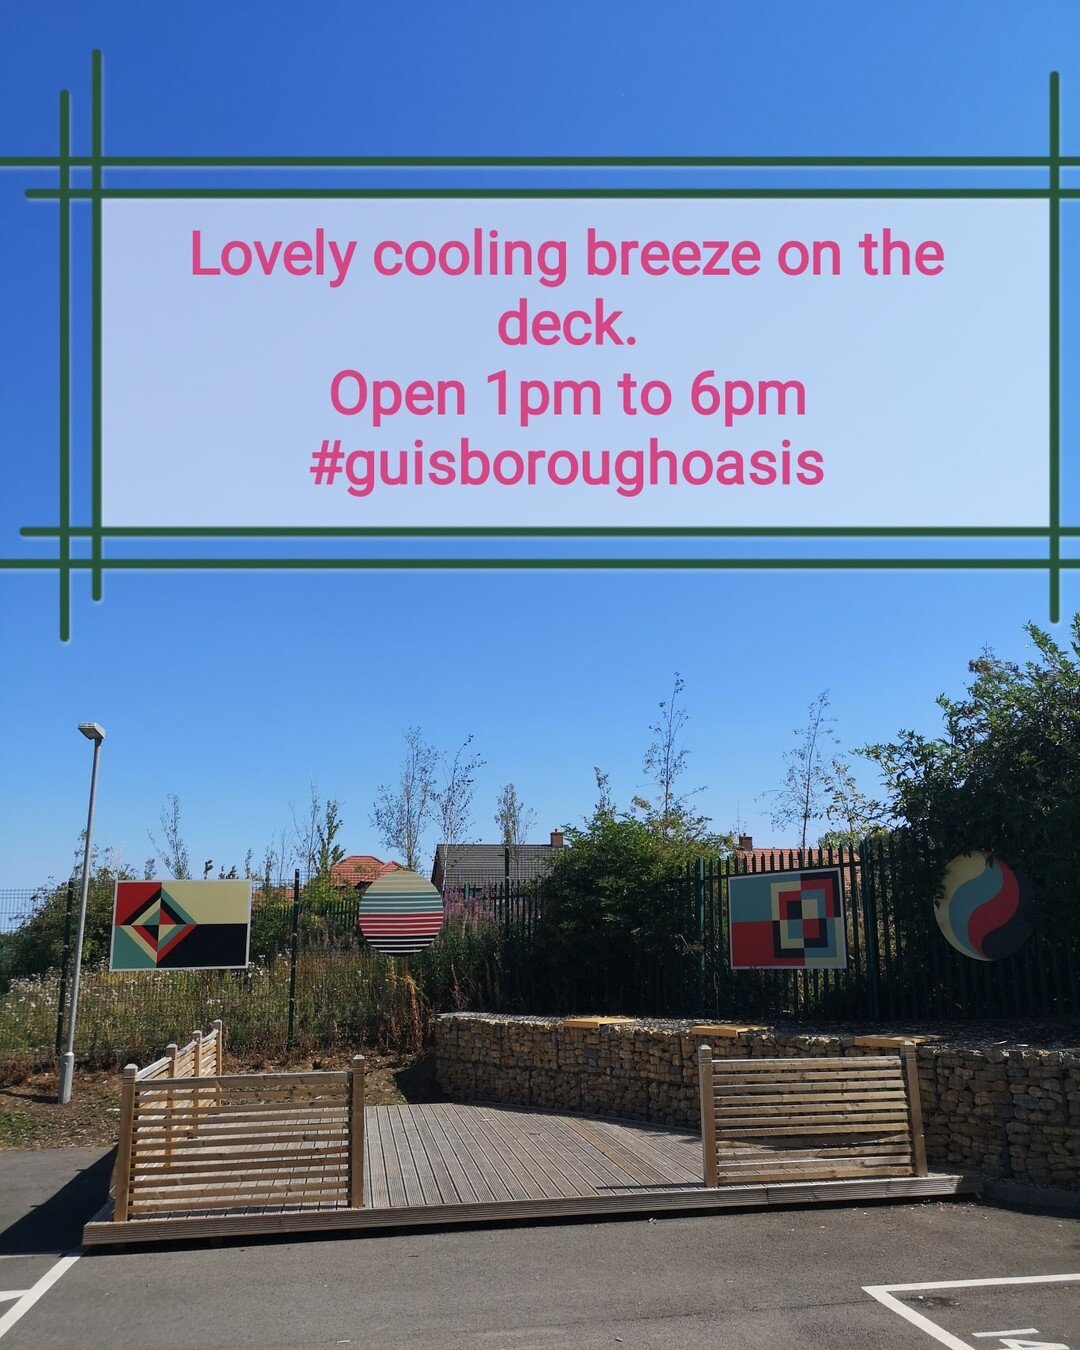 Good afternoon all,

Back open again this gorgeous afternoon (1pm to 6pm or so) for peaceful pints / take outs and chats.

Bottles: VYPA, Delight, Nut Kin
Cans: Sun Daze, Daze

#bittocatchupon #guisbrew #localbeer #guisborough #whattodoinguisborough